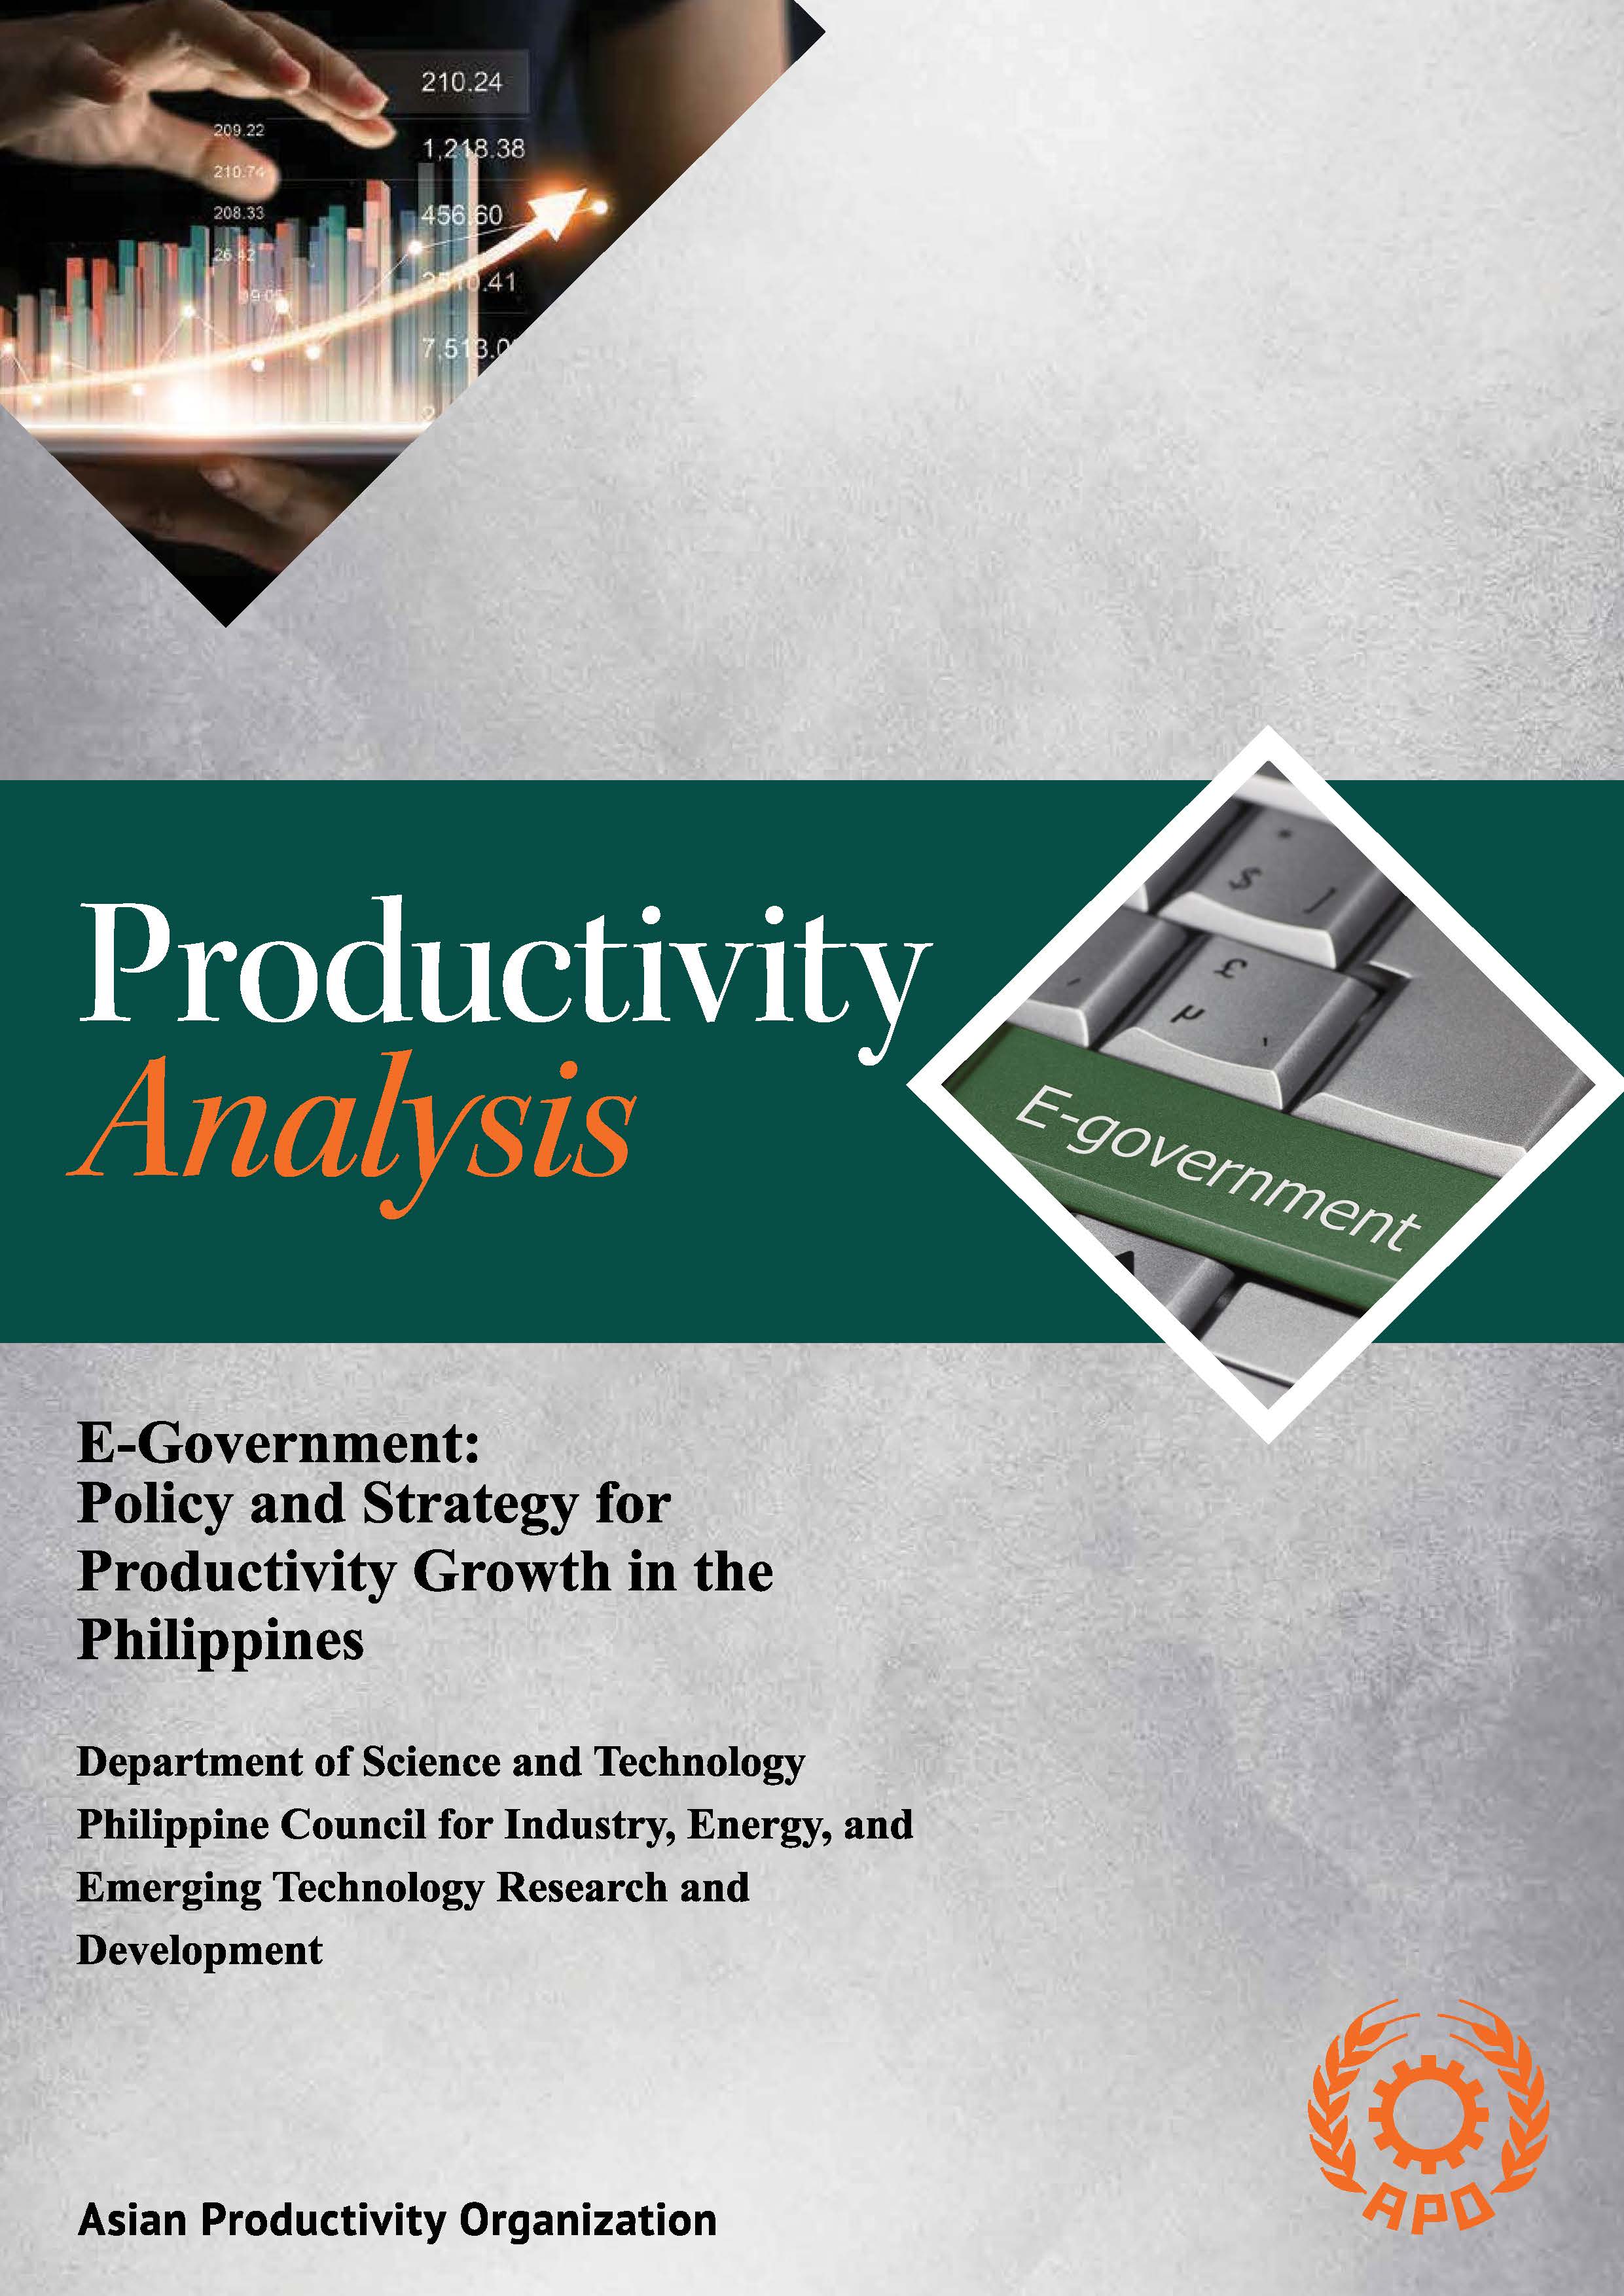 E-Government: Policy and Strategy for Productivity Growth in the Philippines